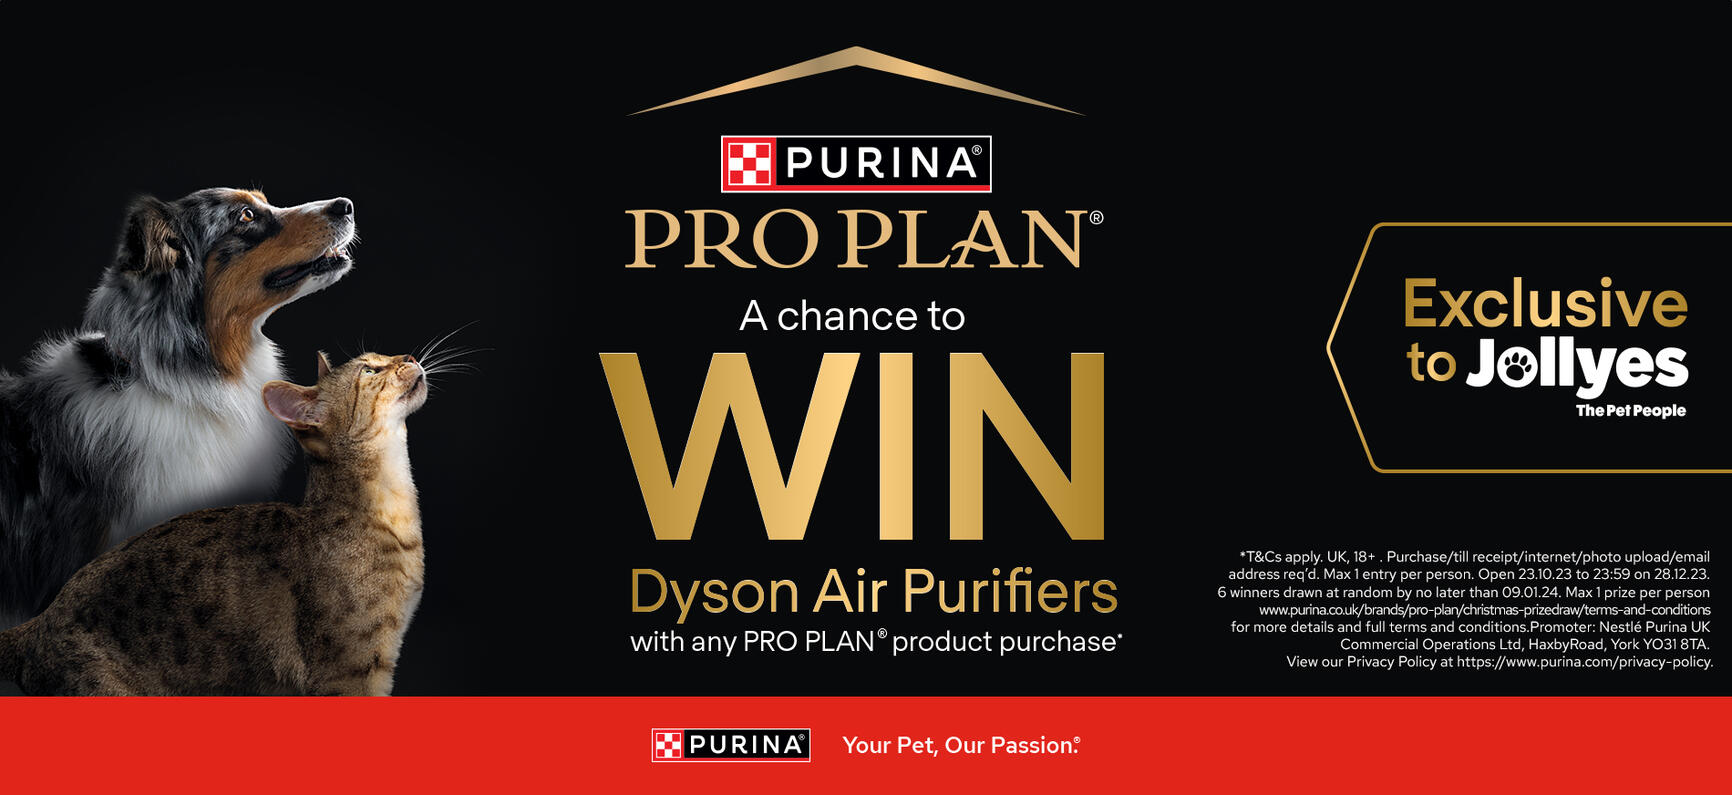 Pro Plan a chance to win dyson air purifiers exclusive to Jollyes